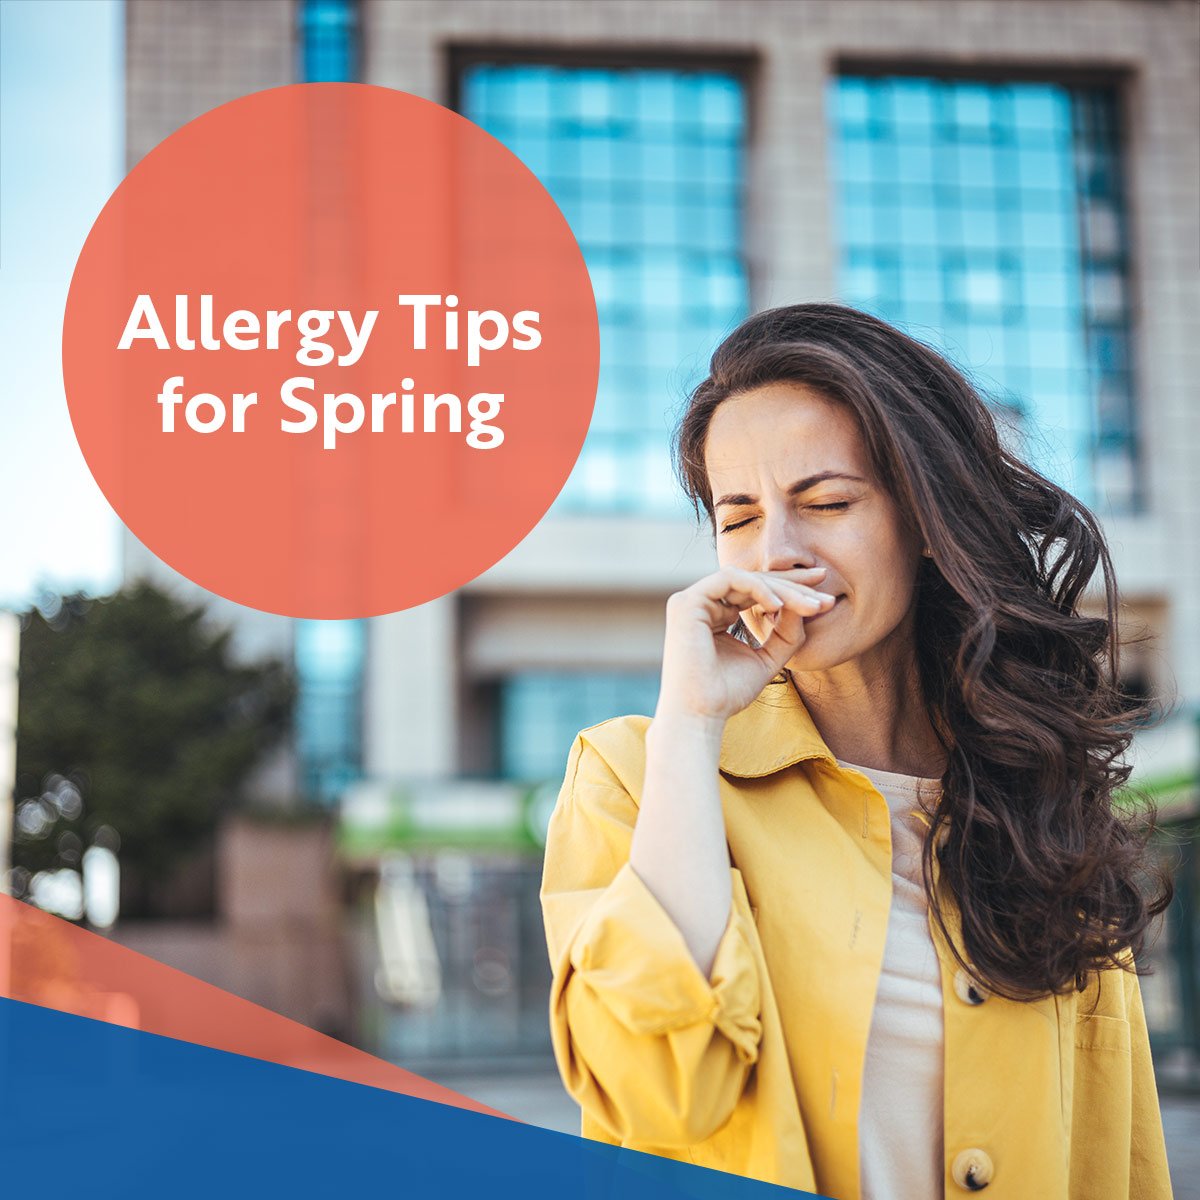 Beat those Spring allergies with these helpful tips:

1. Wear sunglasses to shield your eyes from pollen
2. Use saline nasal flushes to rinse out pollen and soothe sinuses
3. Shower before bed to wash off pollen and prevent it from sticking to your sheets

#AllergySeason